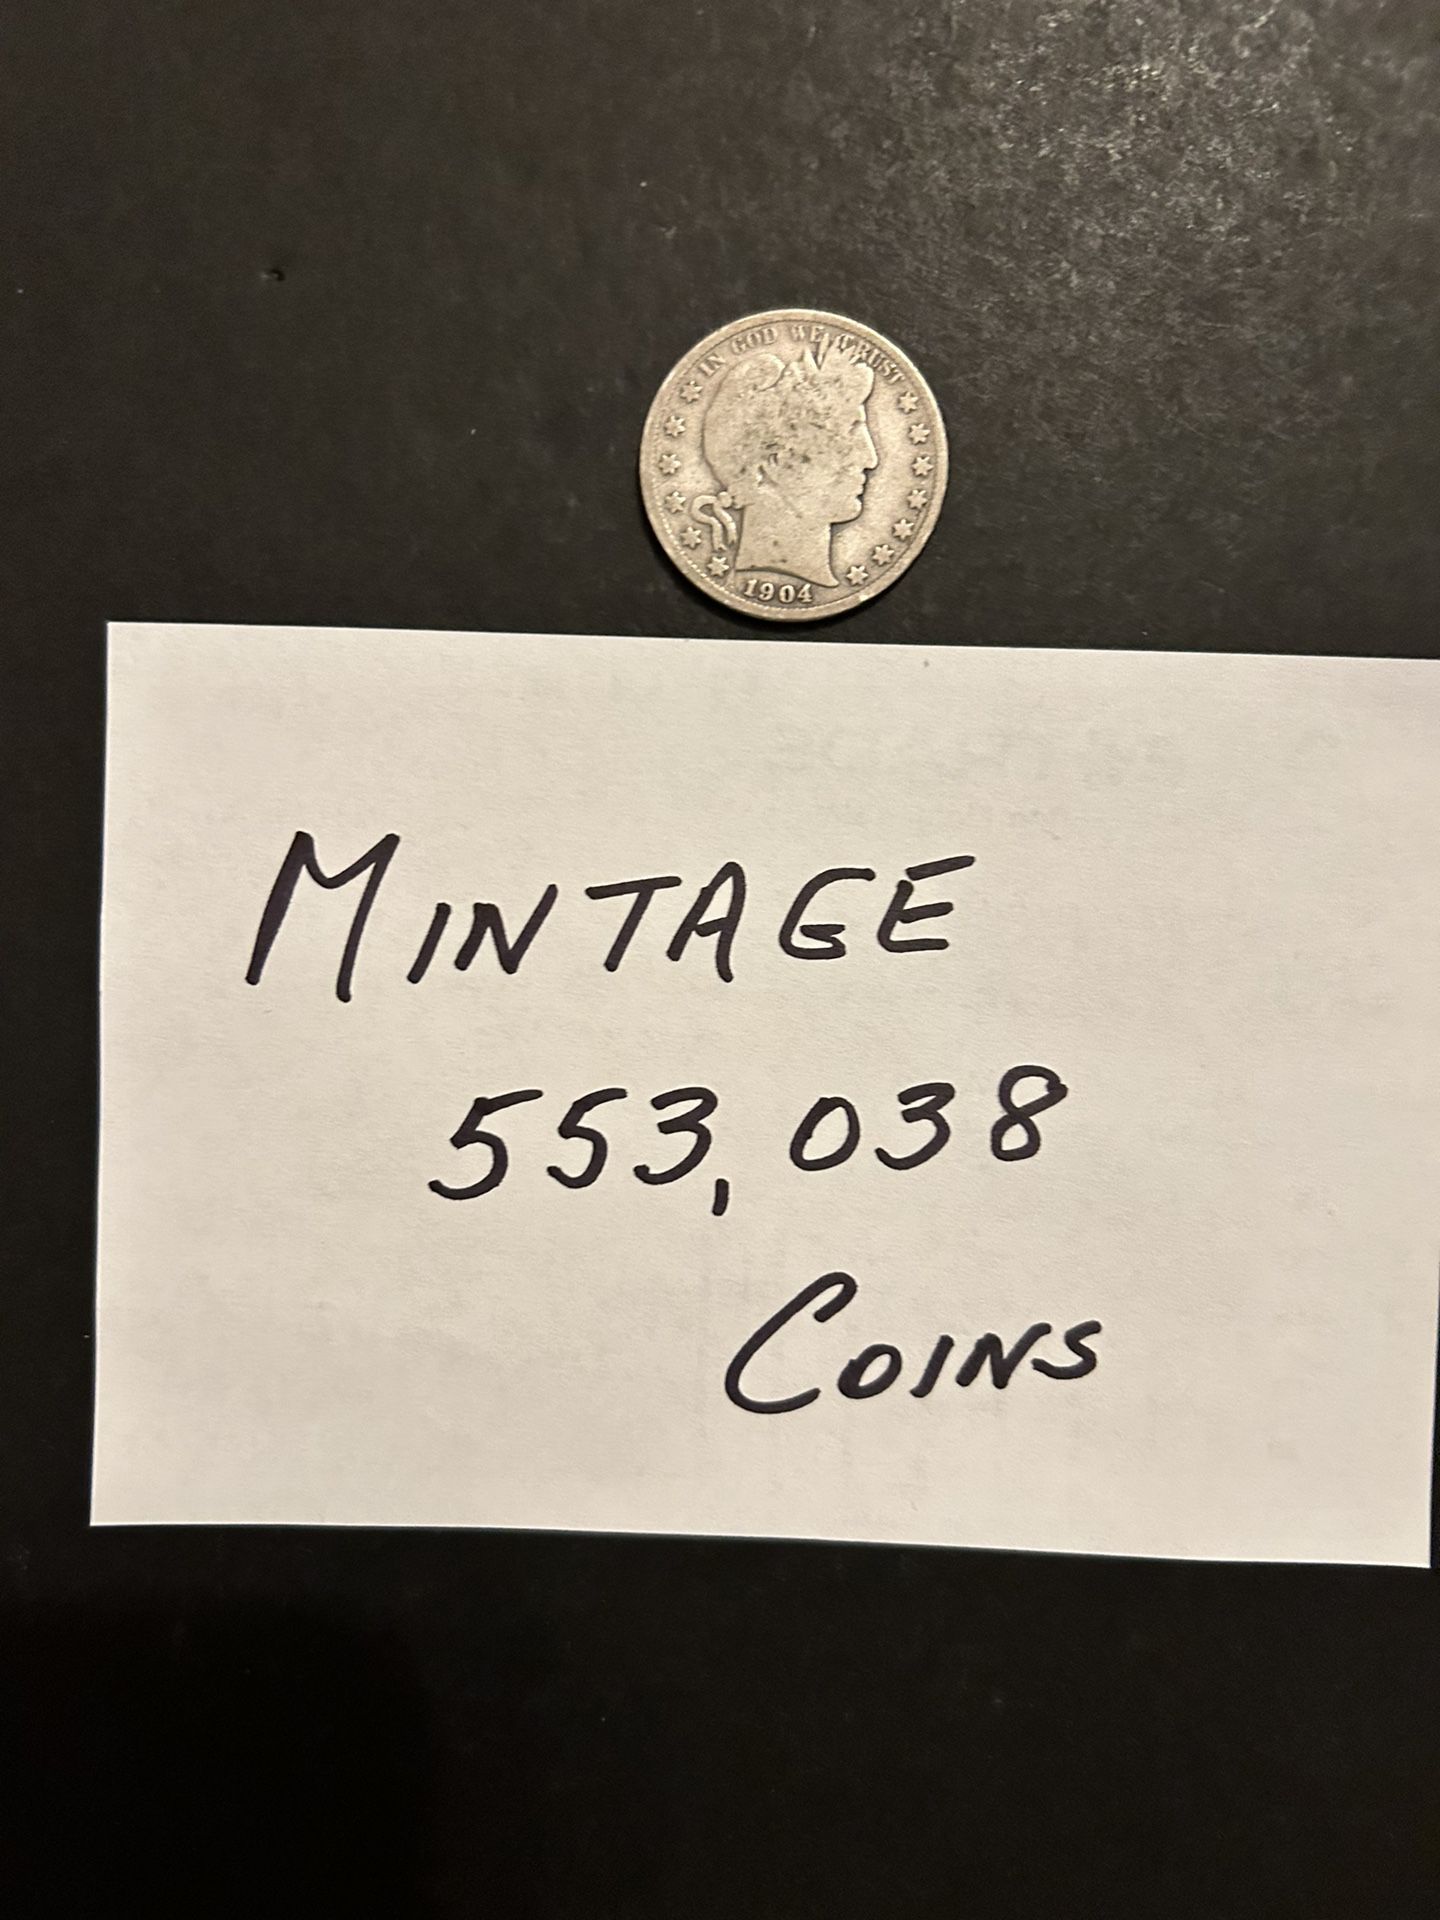 Coins - 1904S Barber Half Dollar - Only 553,038 Minted - San Francisco